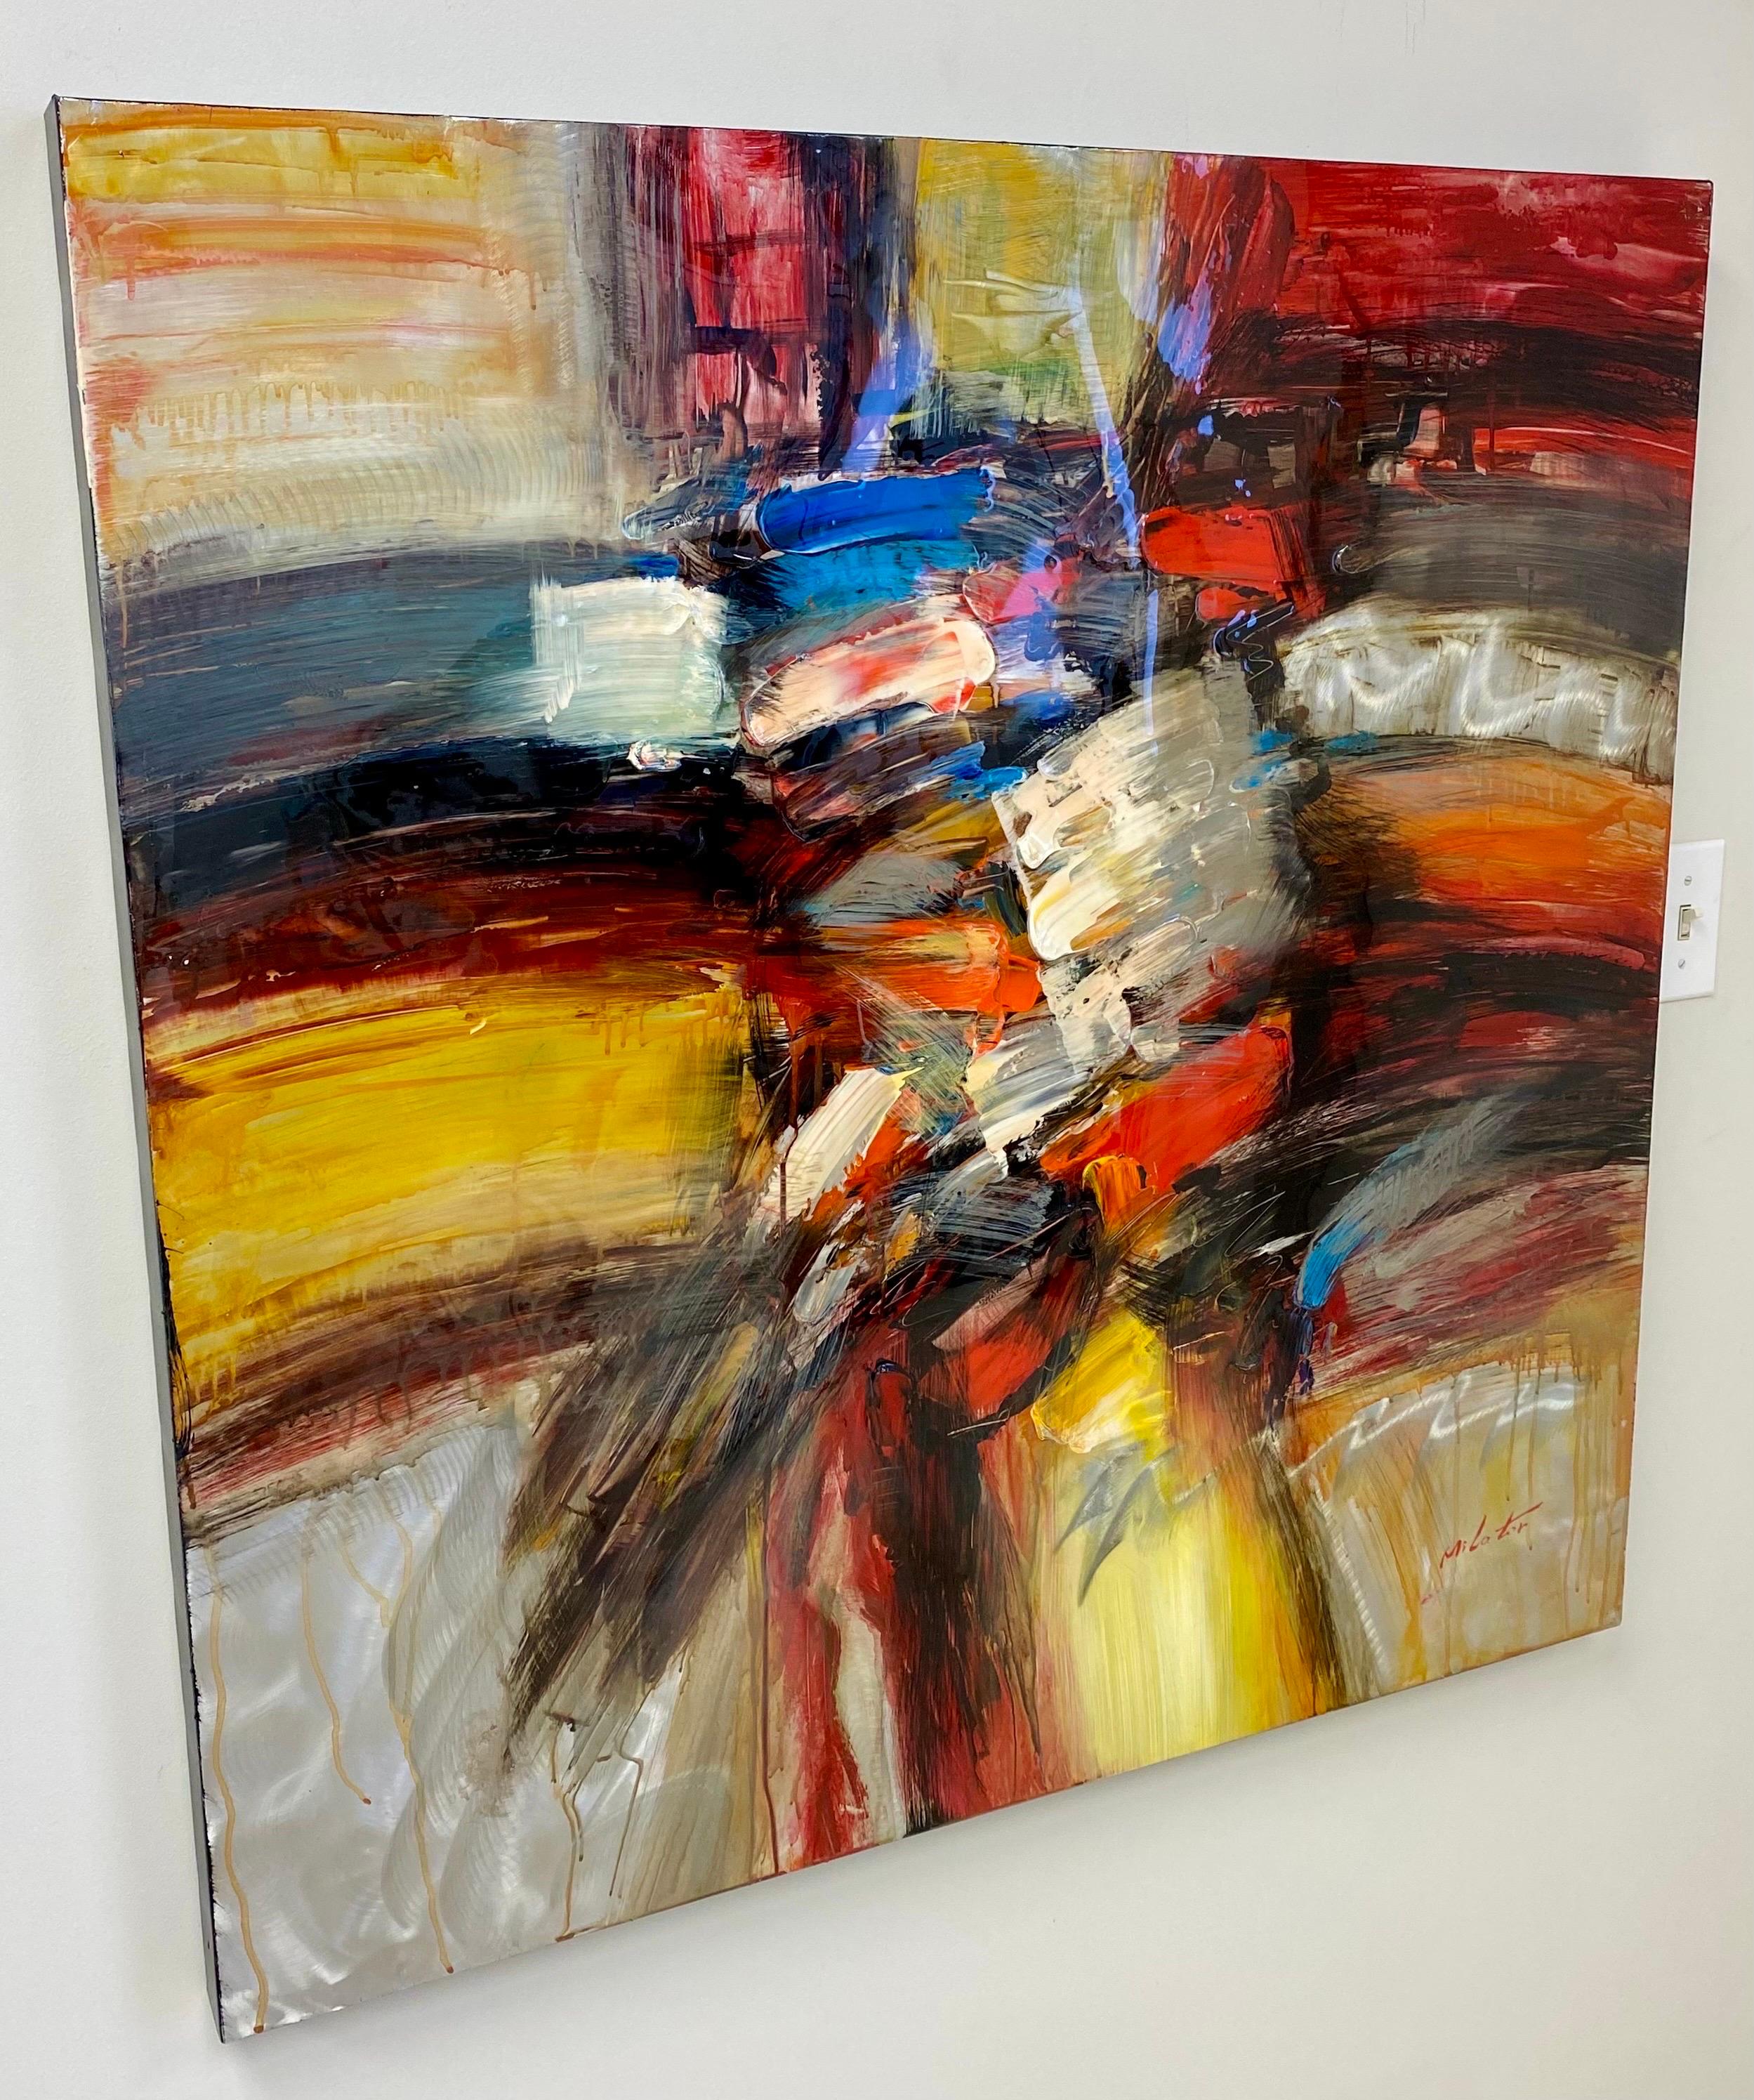 A large Abstract Acrylic painting by Milo Tor ( Holland)  in the manner of Wildfred Lang ( Chinese, 1954). The original art work was painted oil on canvas by Wilfred Lang and entitled Joy. Milo Tor reproduced the art work with acrylic on aluminum